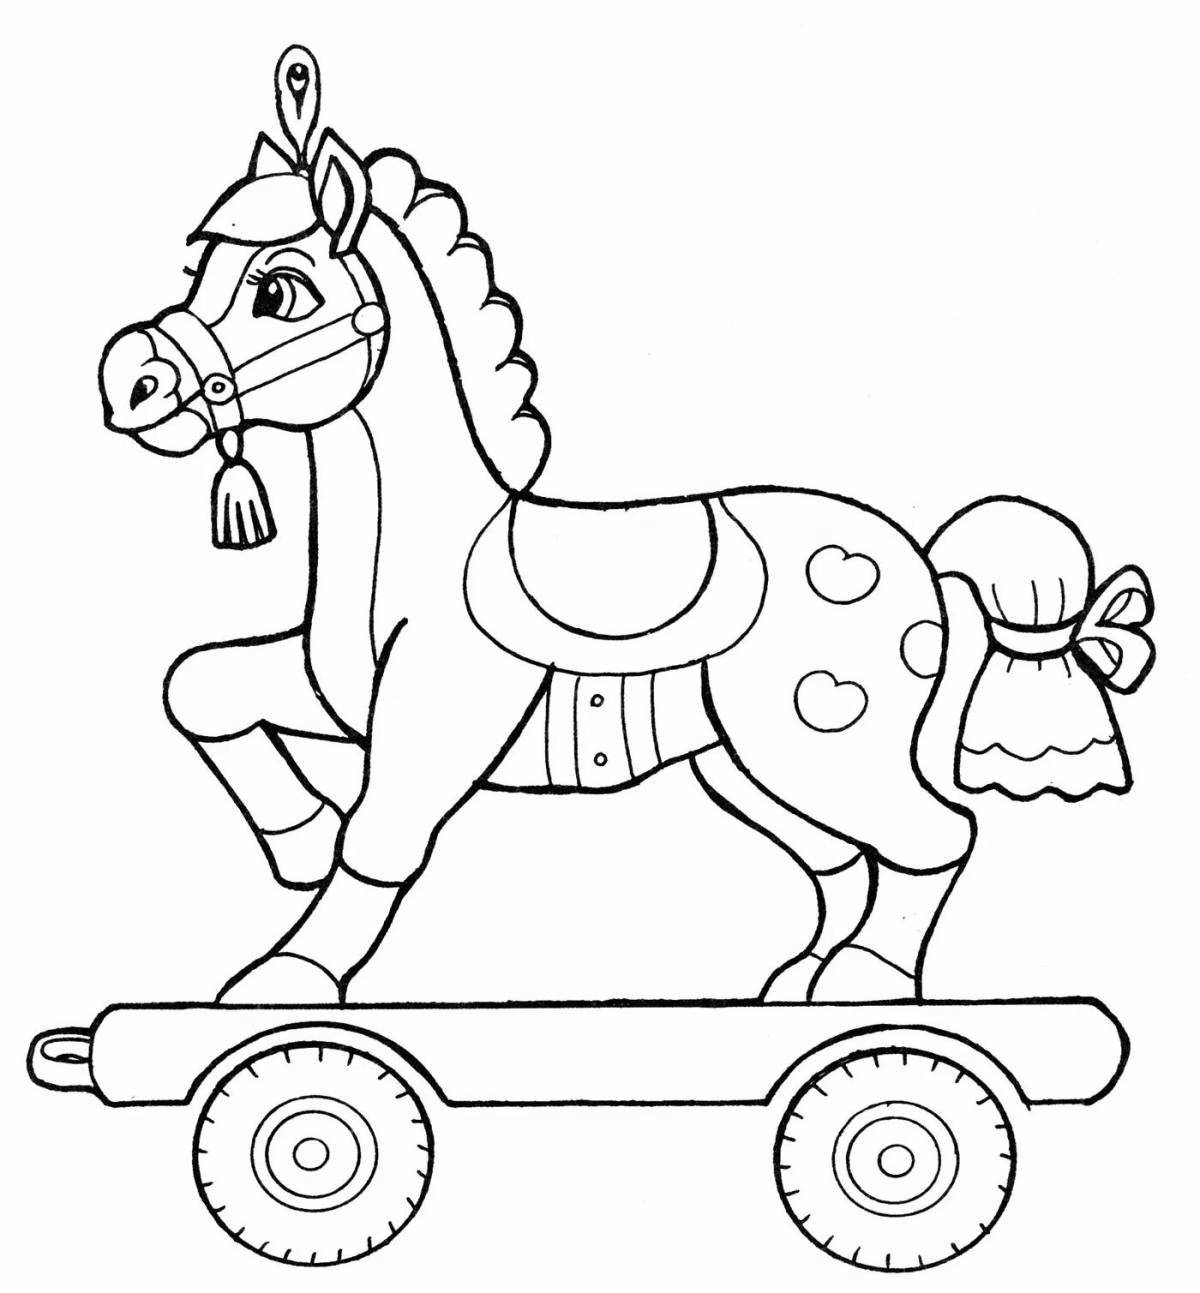 Colorful horse toy coloring book